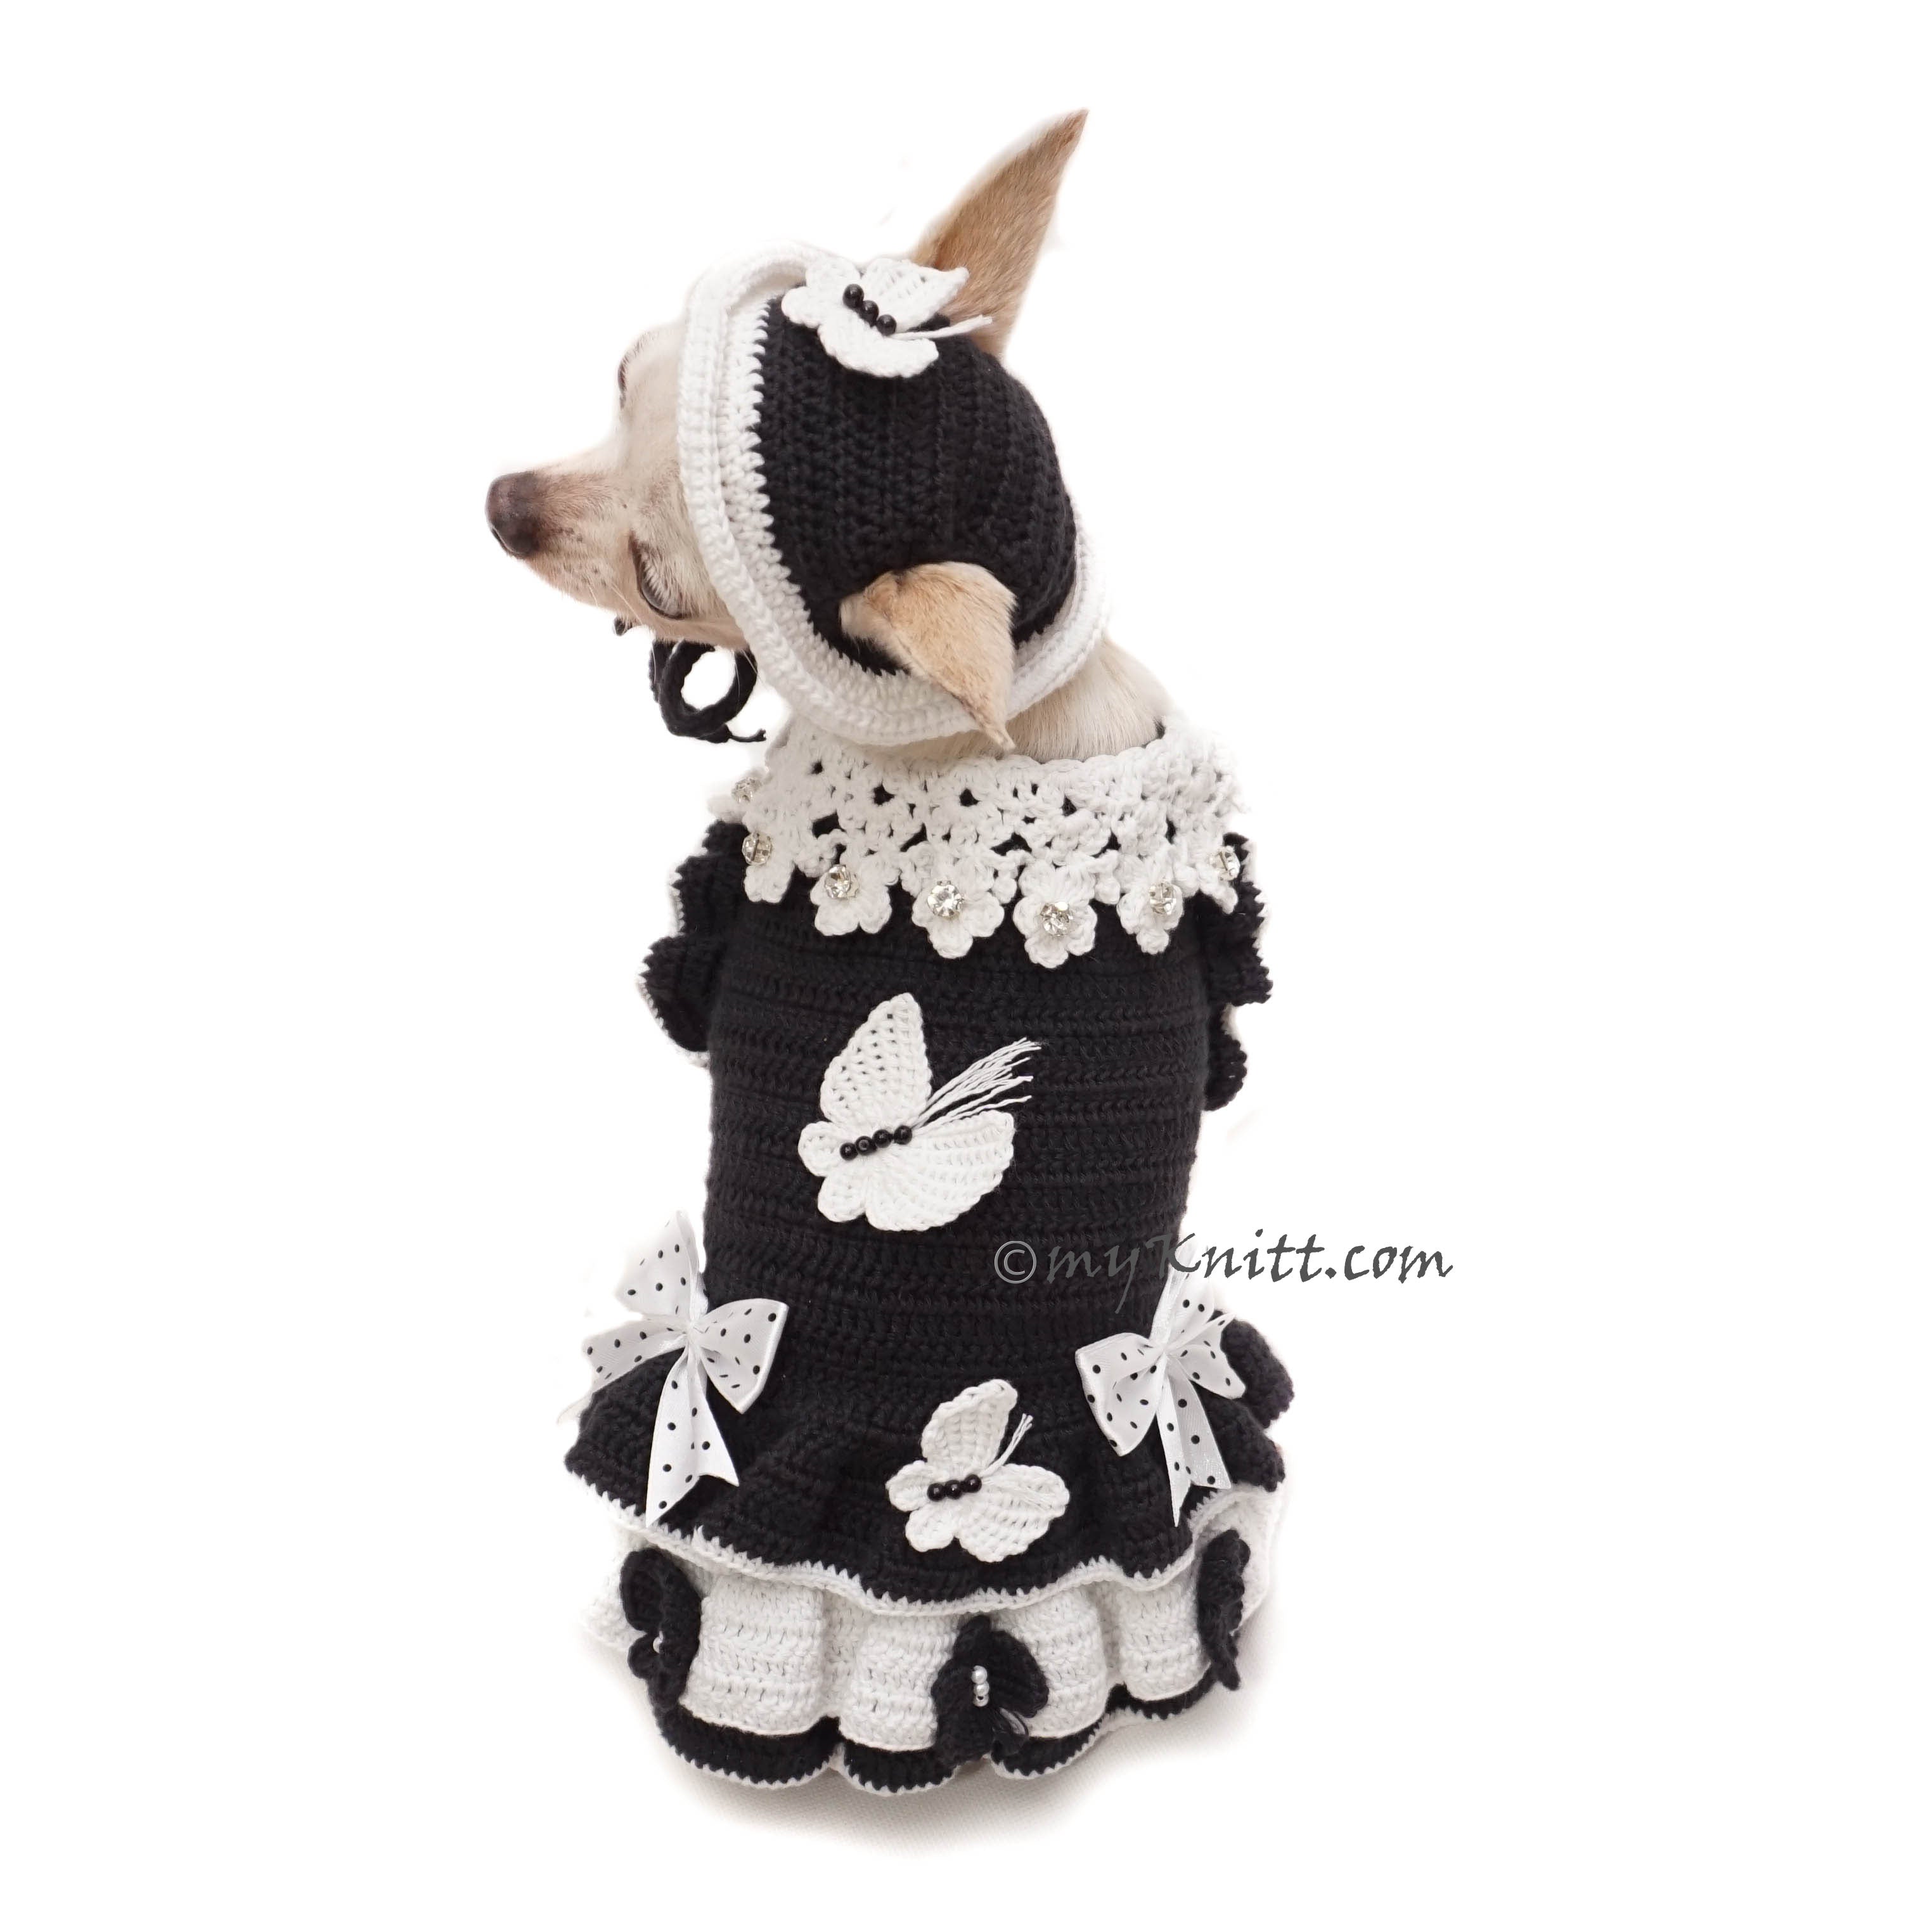 Black and White Butterfly Polka dot Dog Dress Crochet with Matching Hat DF236 by Myknitt